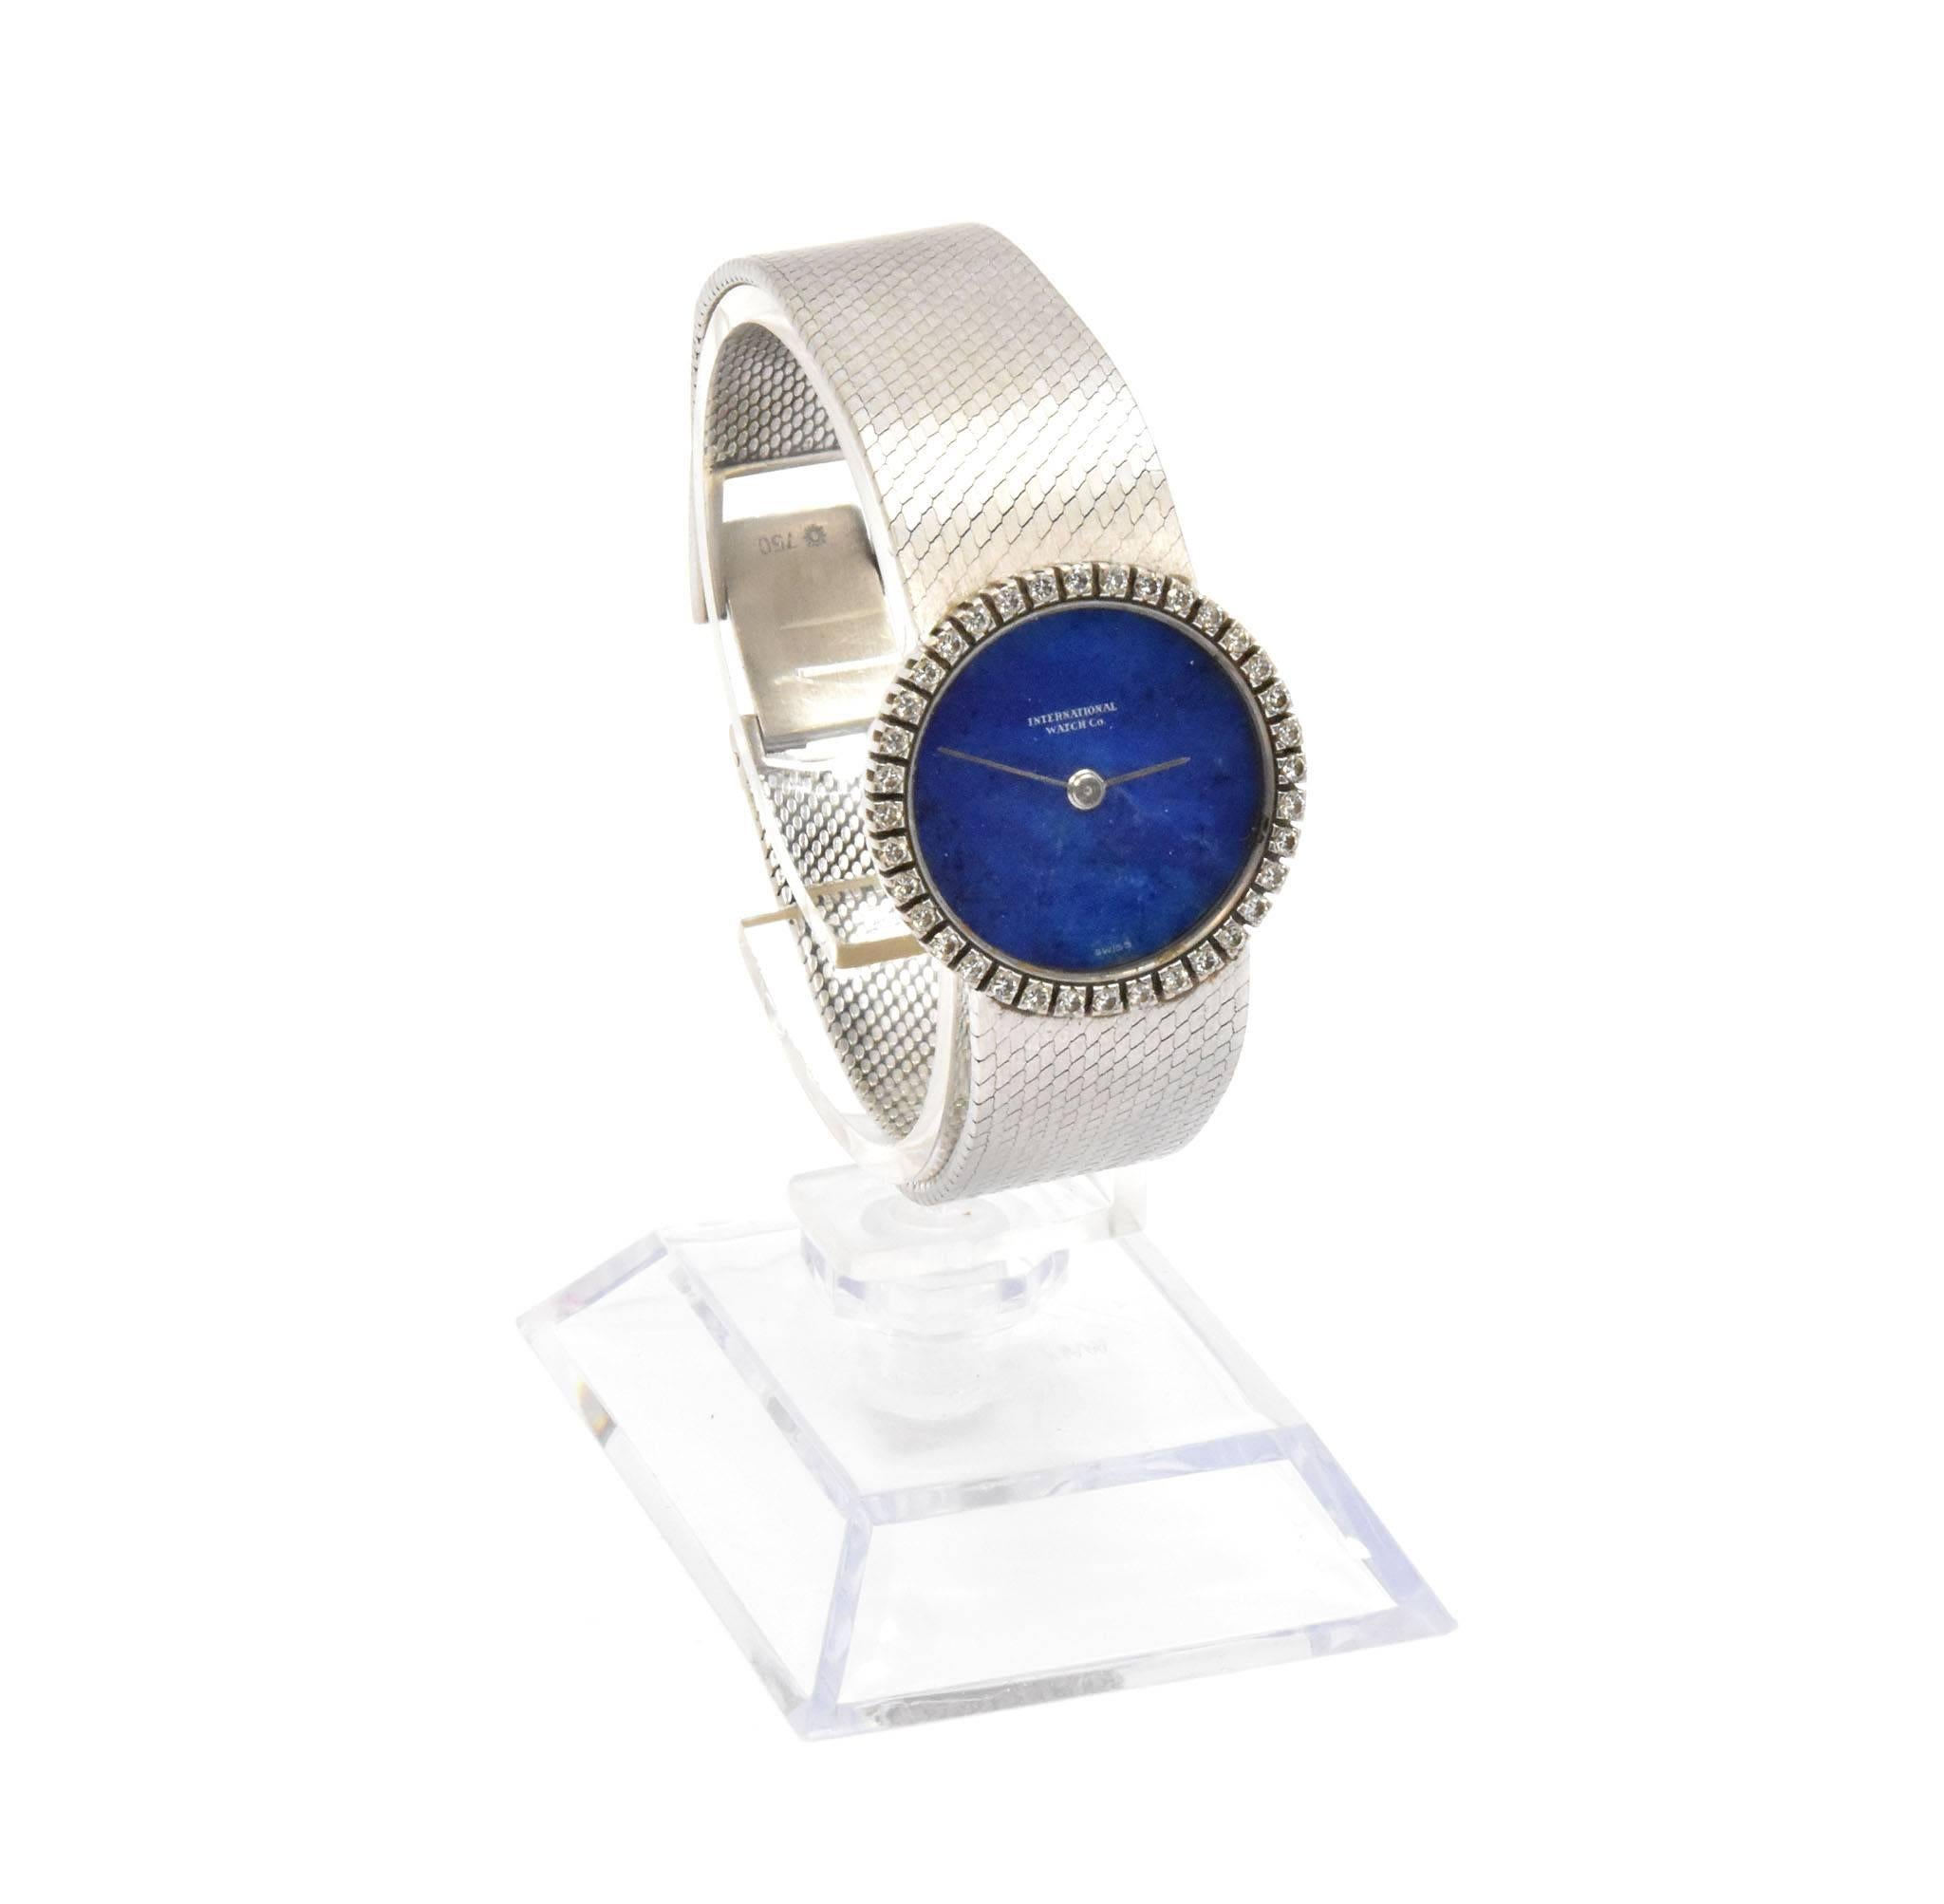 Movement: Swiss, Cal 185, 18 jewel, Adjustable 5 positions
Function: hours, minutes
Case: 24mm 18k white gold round case, sapphire crystal, 
Bezel: 36 round brilliant diamond set bezel equaling 
0.72ctw with G-H, VS
Band: 18k white gold integrated